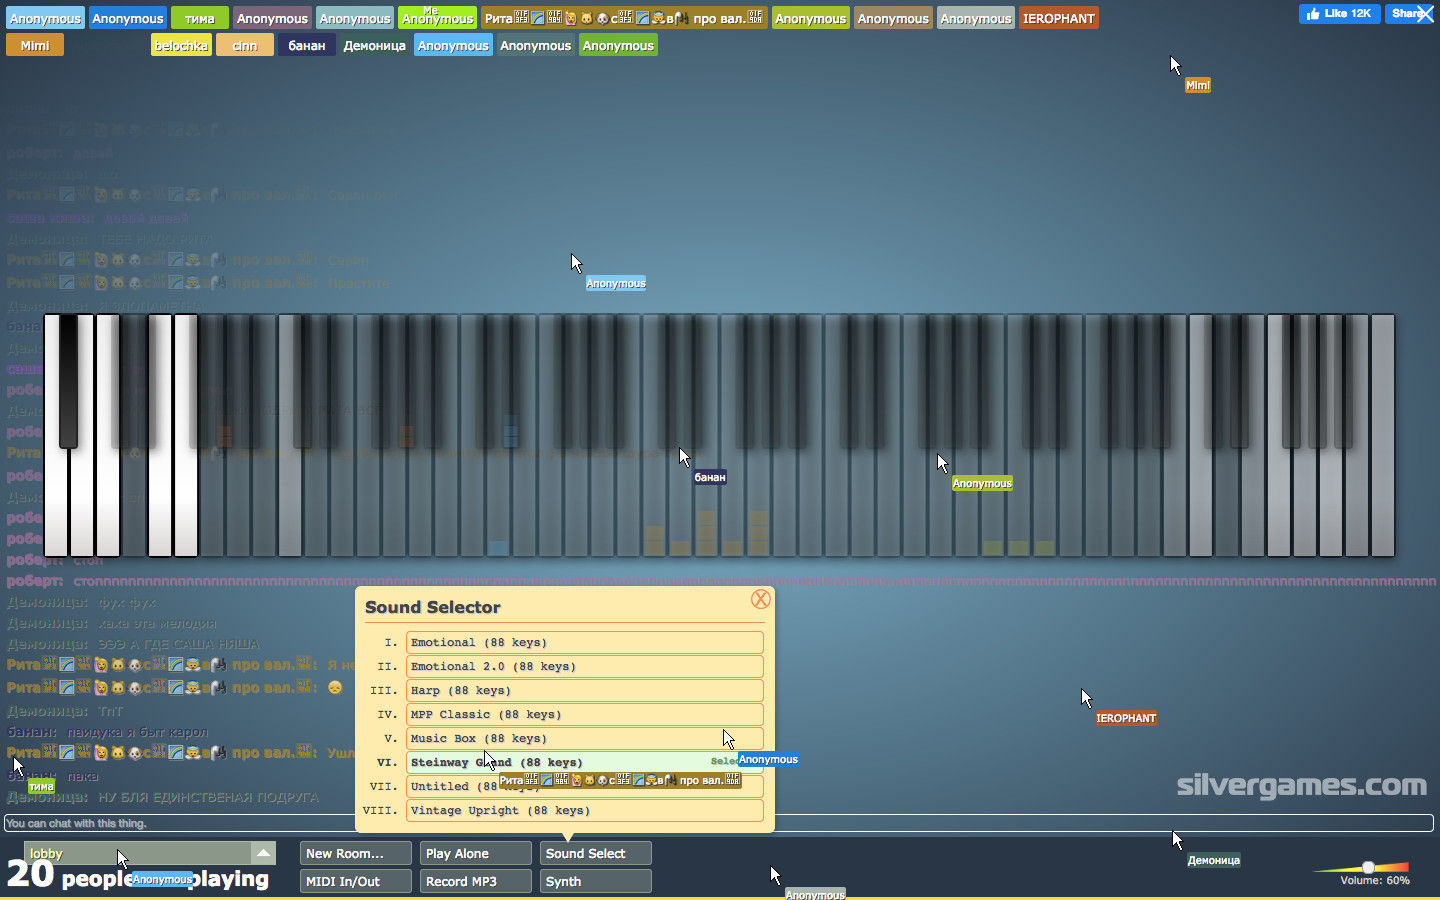 MPP Inspired Sites, Multiplayer Piano Wikia